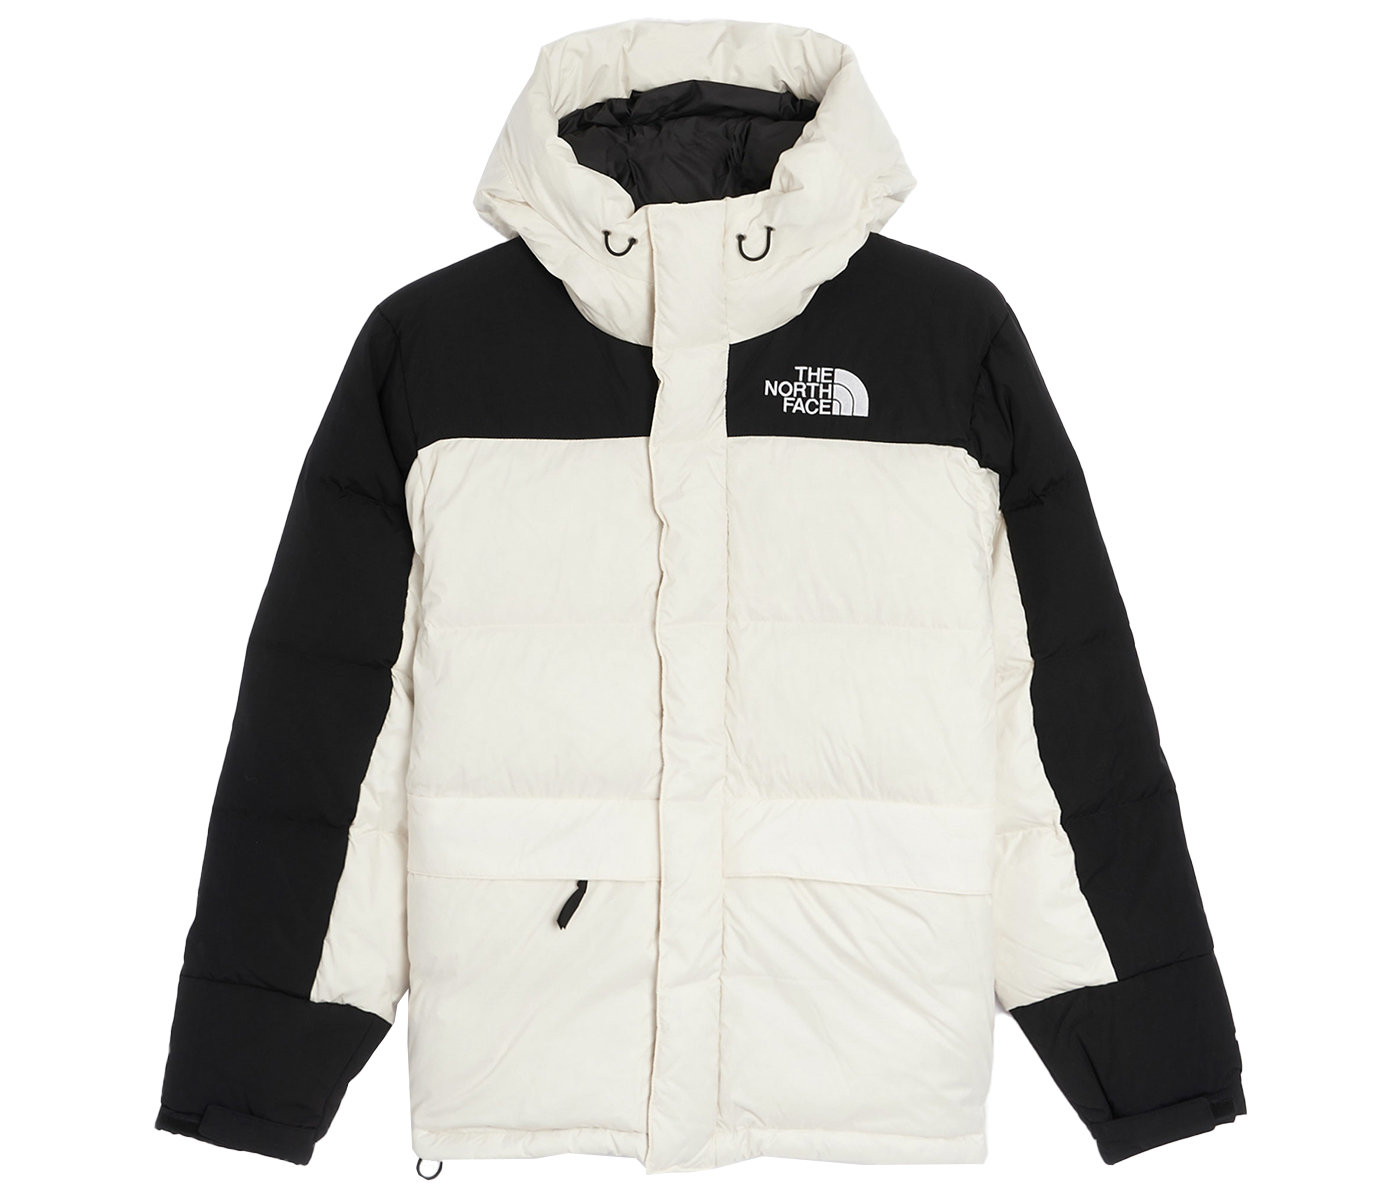 The North Face HMLYN Down Parka Jacket White Black